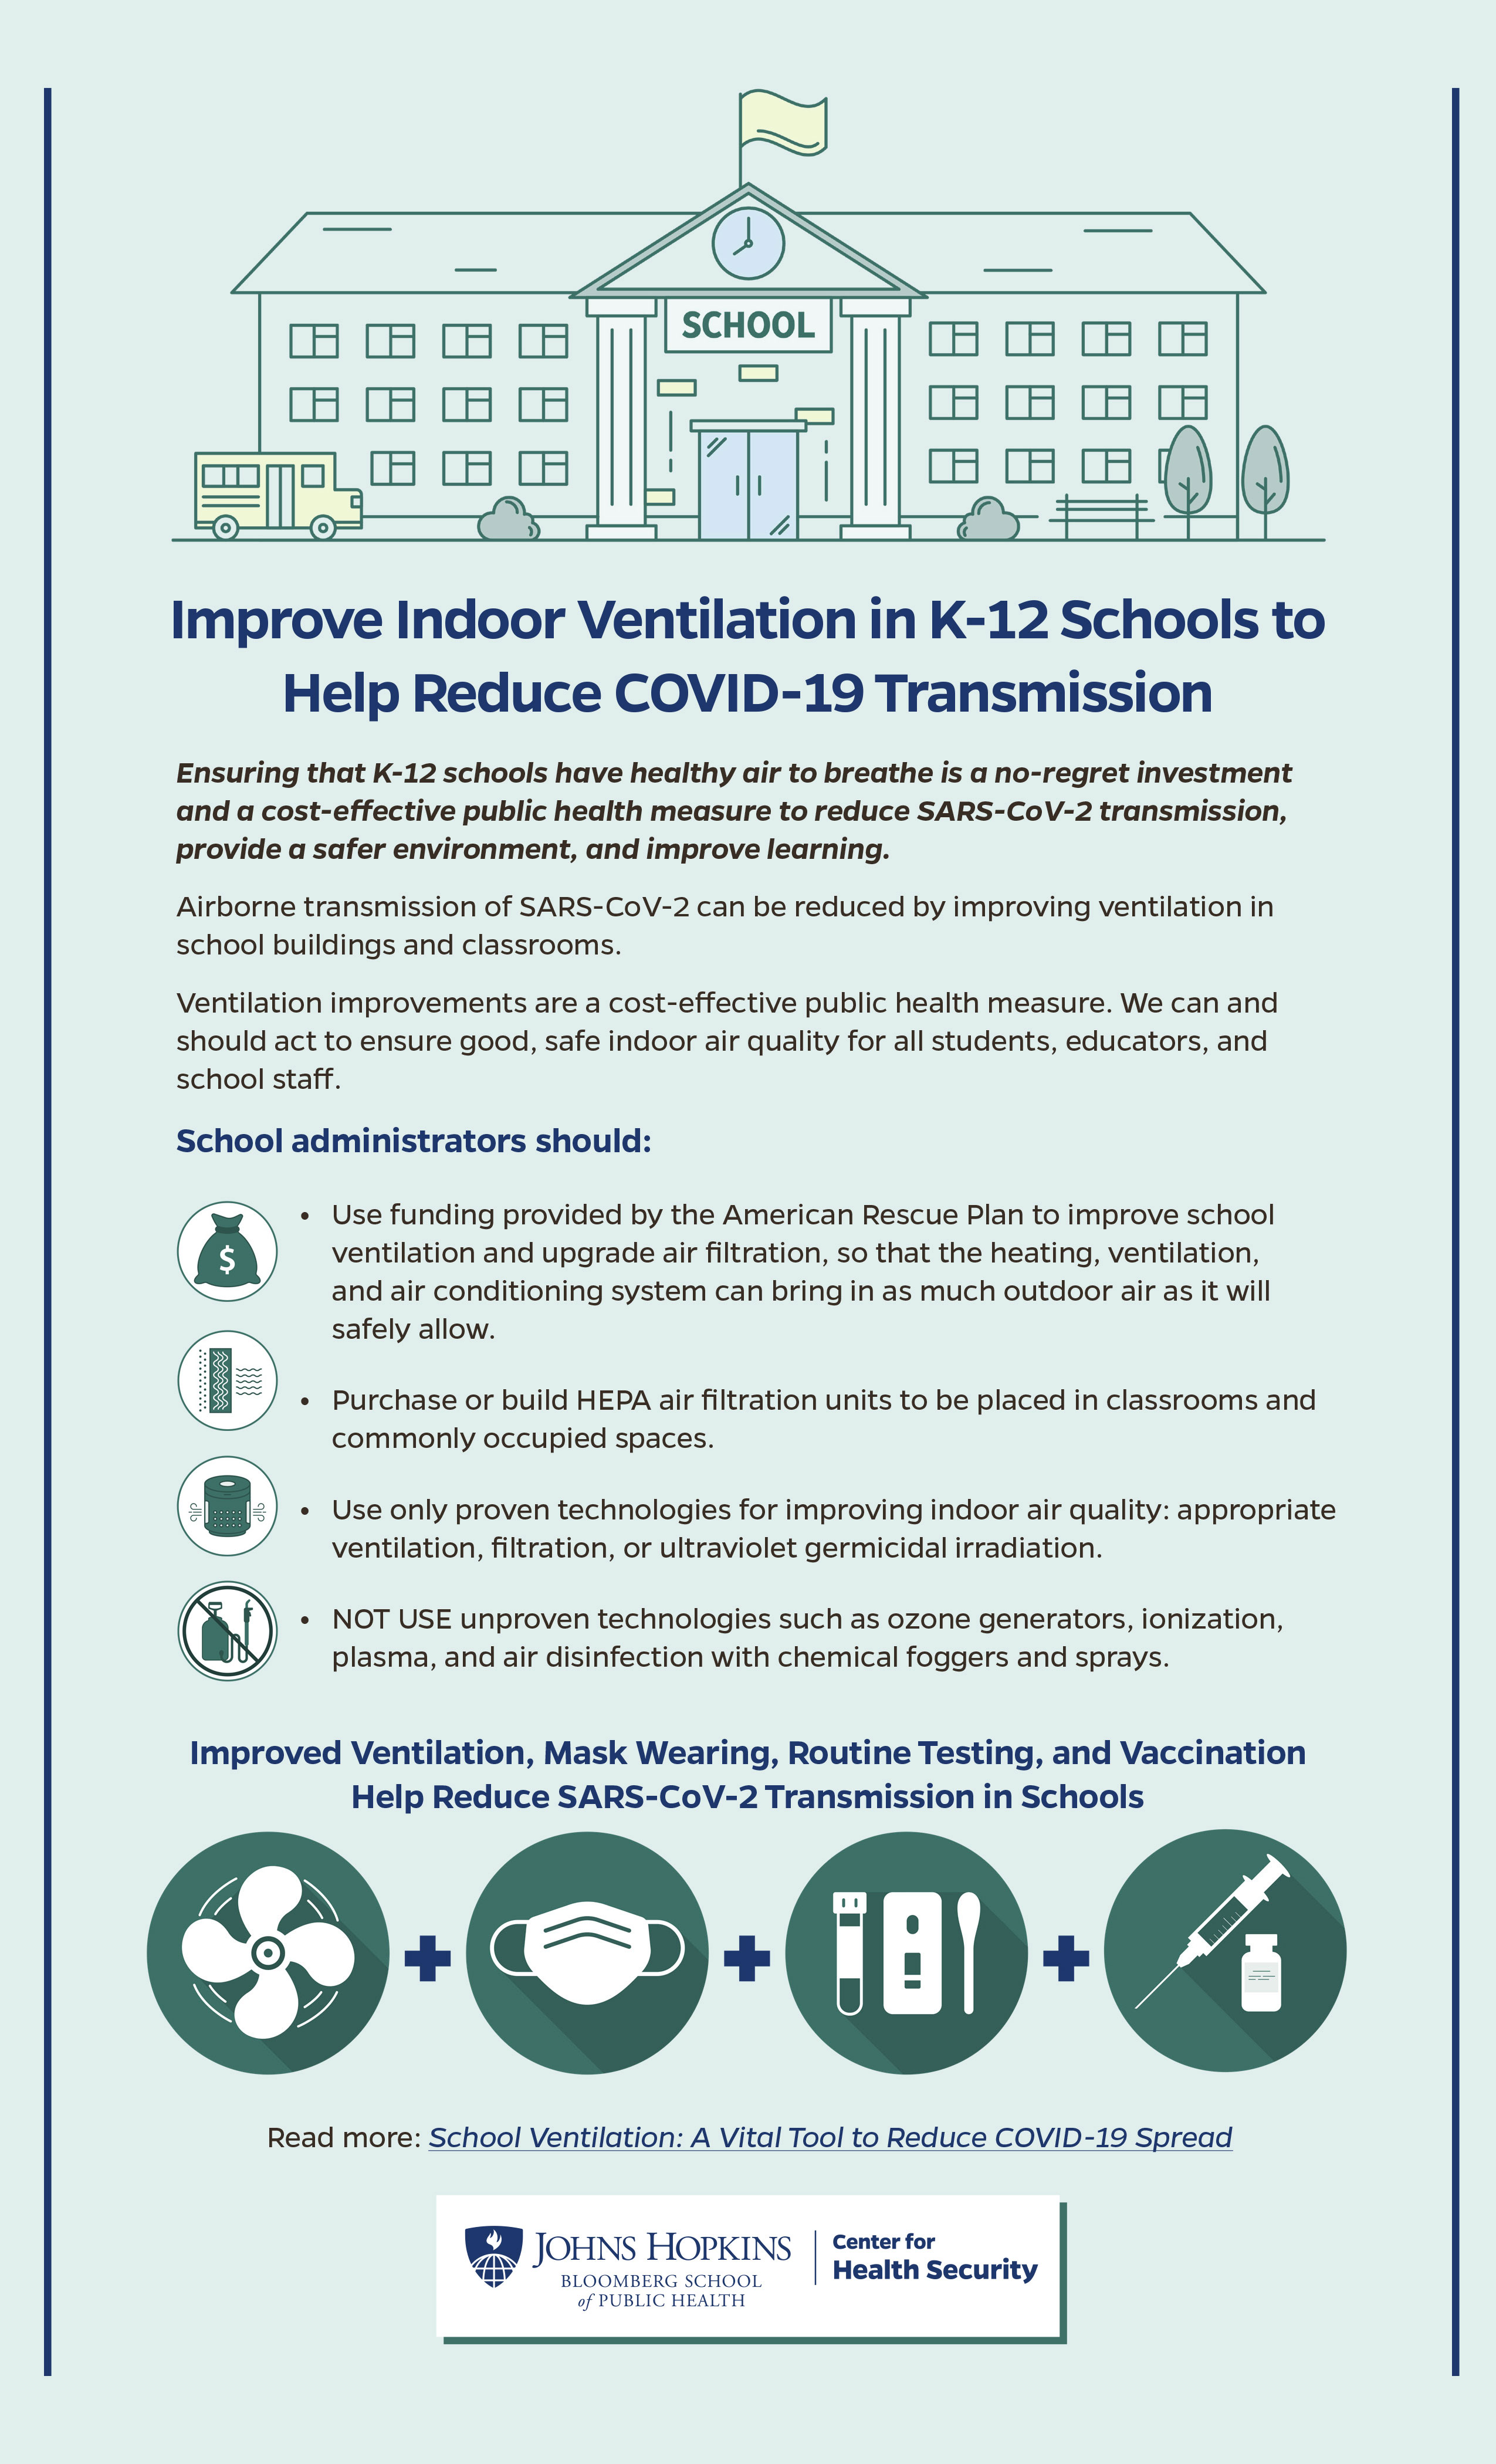 Tips to Improve Indoor Ventilation in K-12 Schools to Help Reduce COVID-19 Transmission